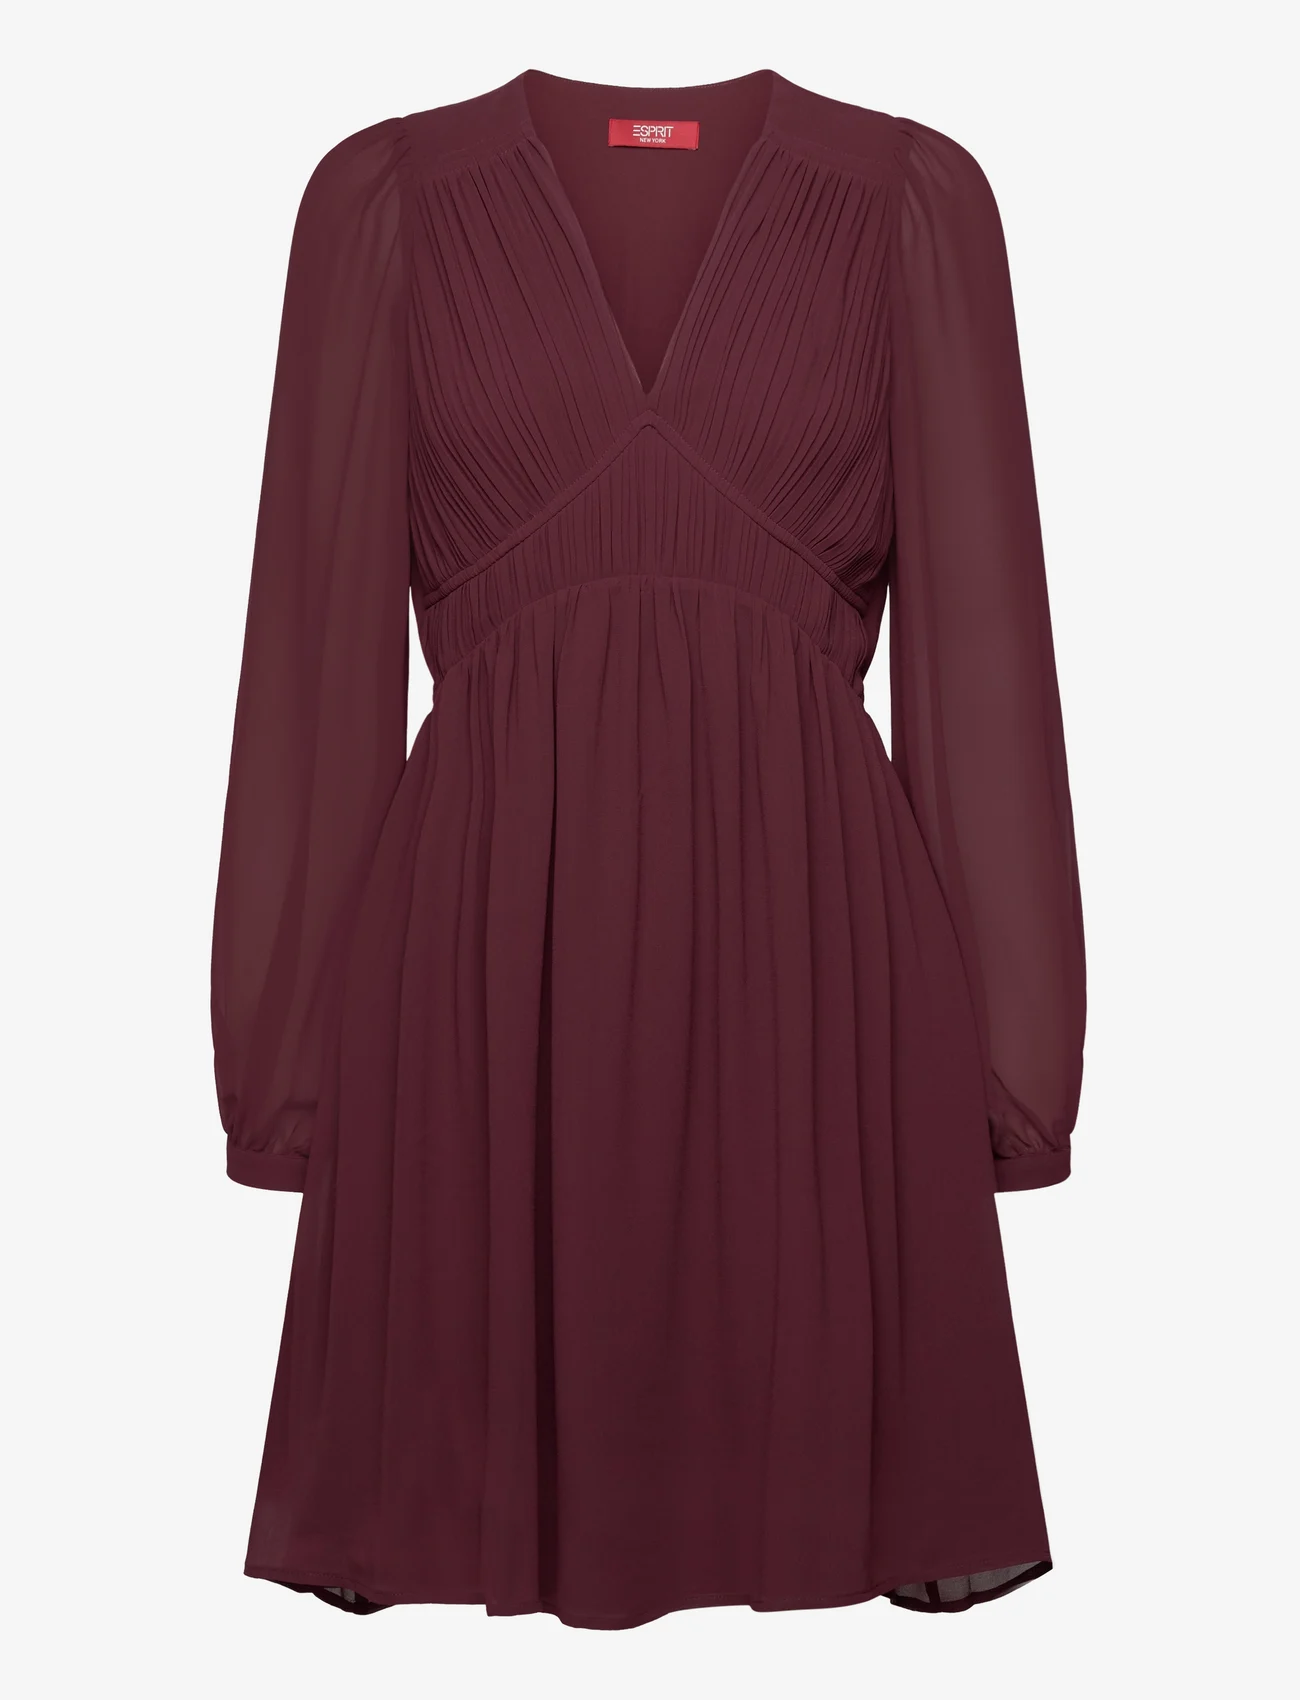 Esprit Casual - Dresses light woven - party wear at outlet prices - bordeaux red - 0